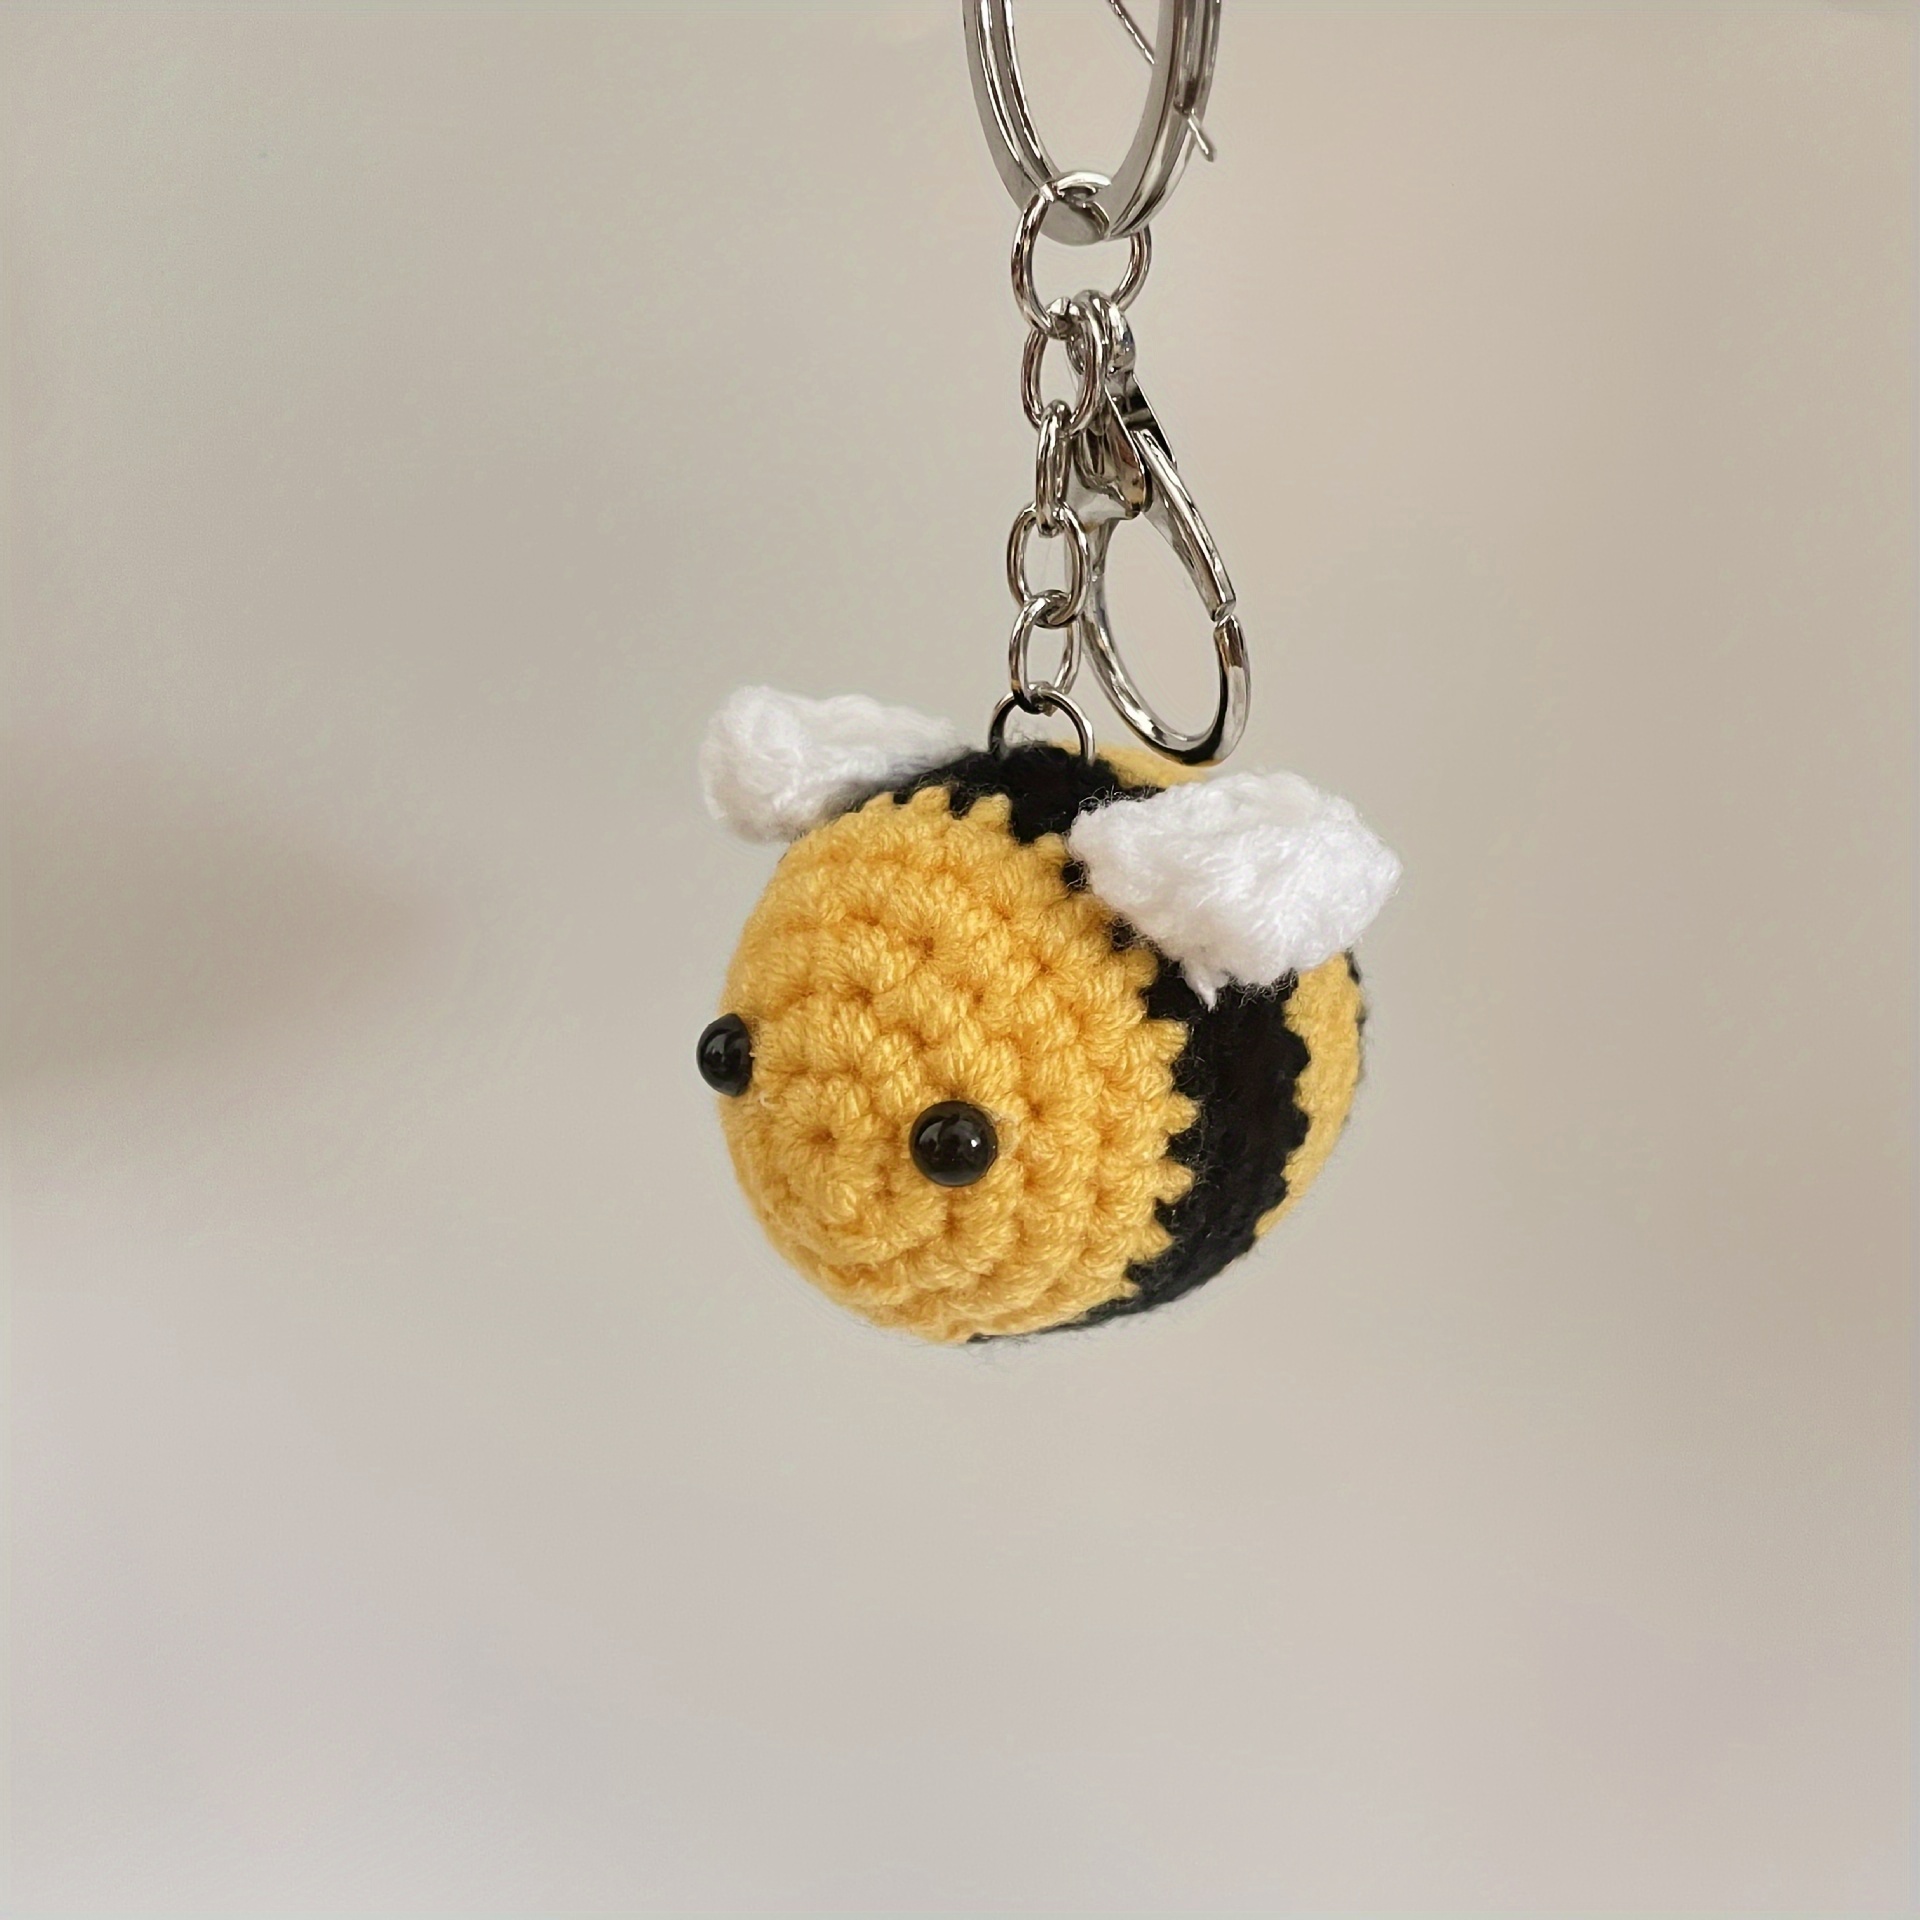 

Handmade Crochet Bee Keychain - Cute Woolen Animal Charm For Backpacks & Cars, Lobster Clasp, Fashionable Women's Accessory, Perfect Birthday Gift Or Party Favor